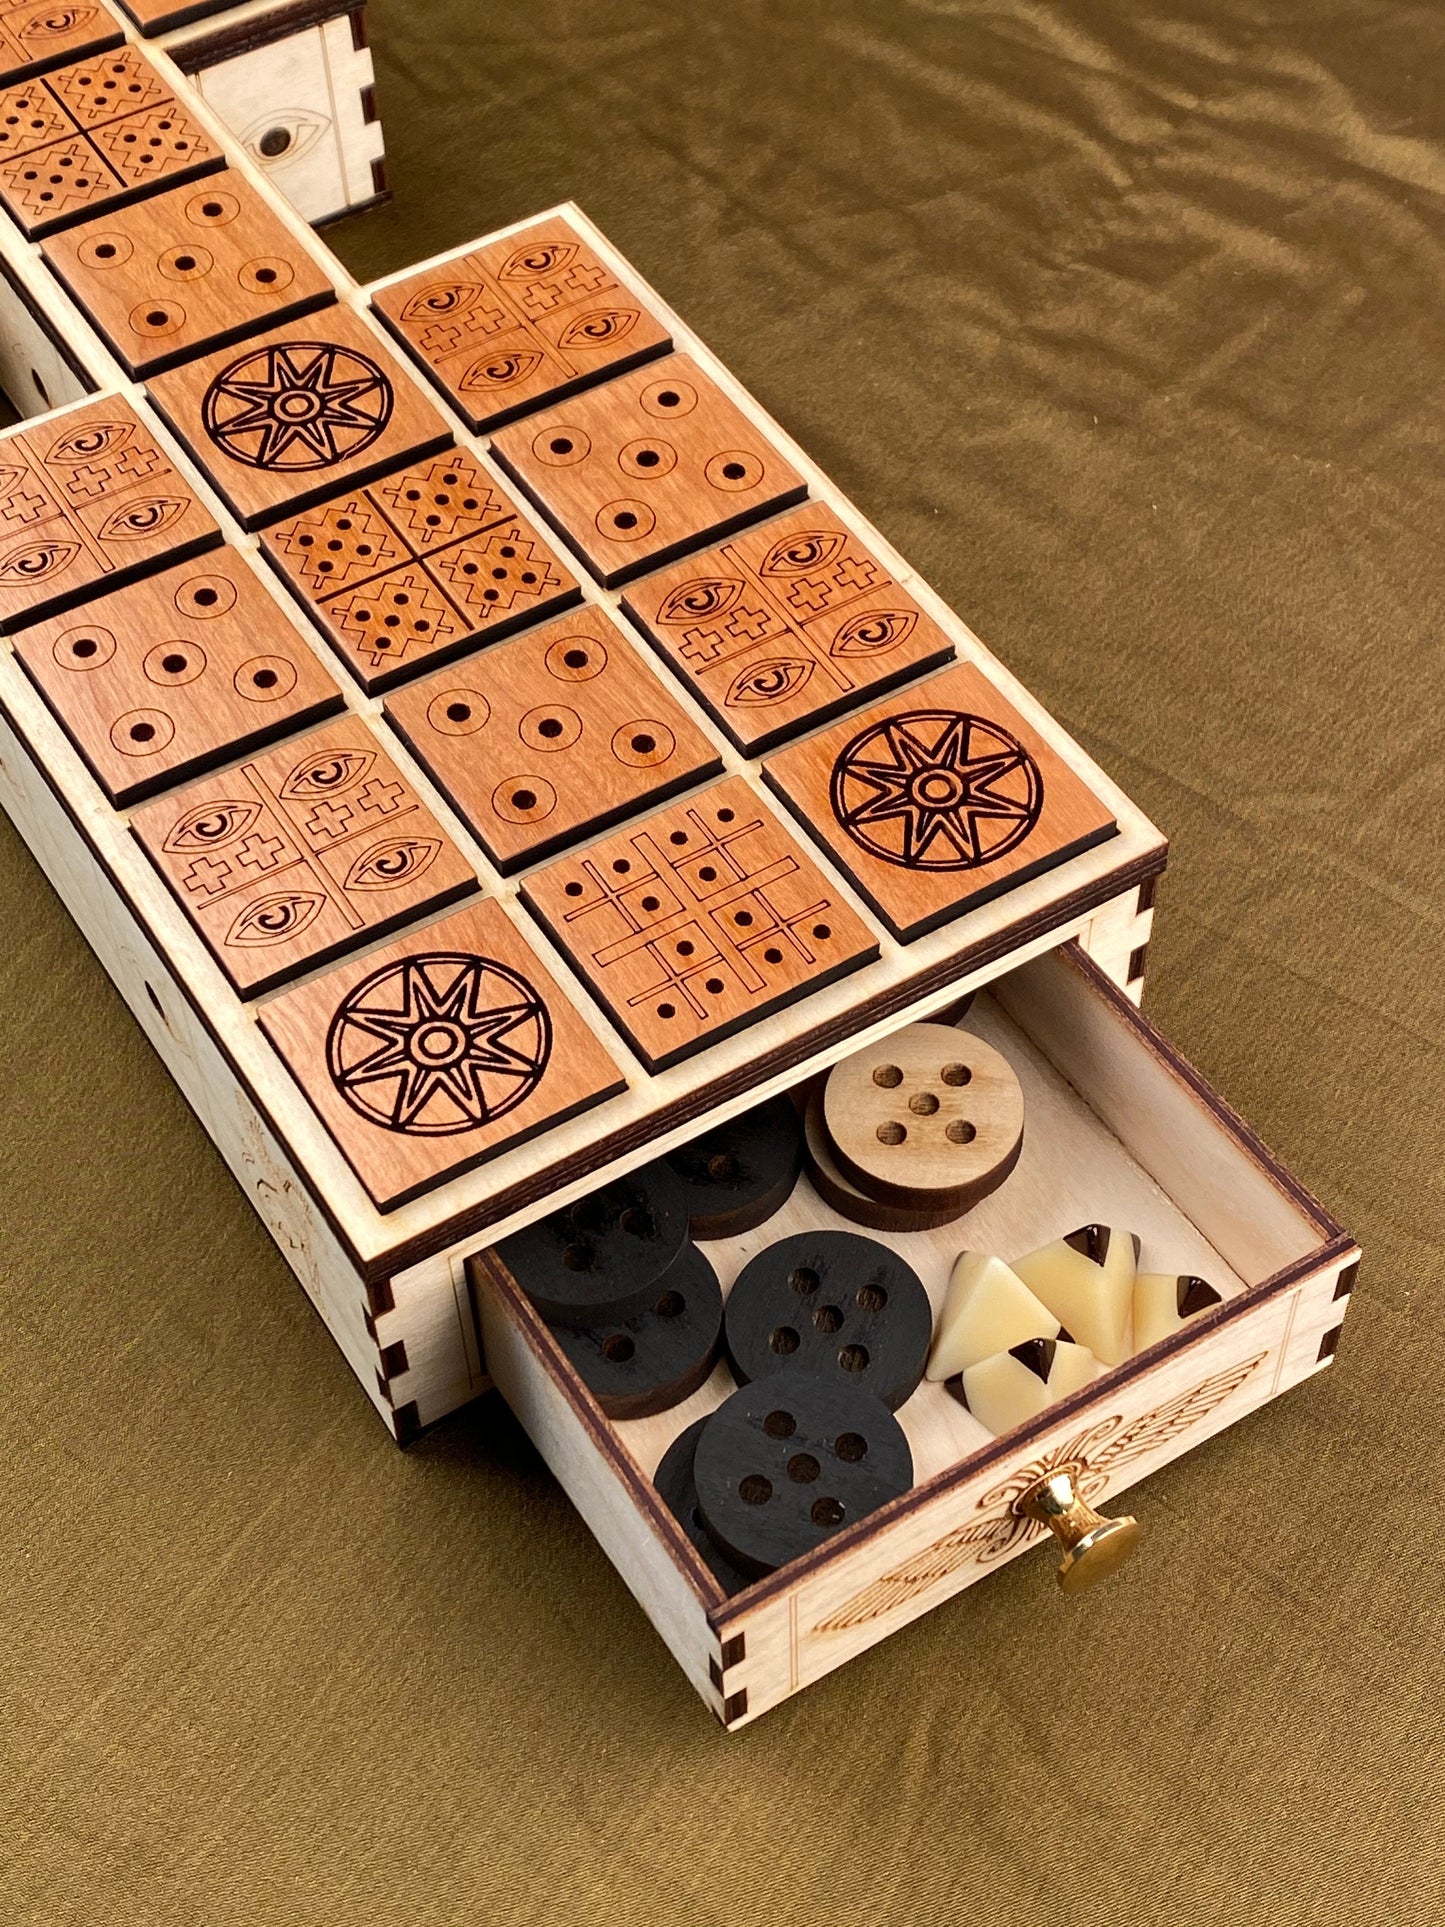 The Royal Game of Ur ~ The Ancient Sumerian Game. Beautiful Wood with Amazing Details.